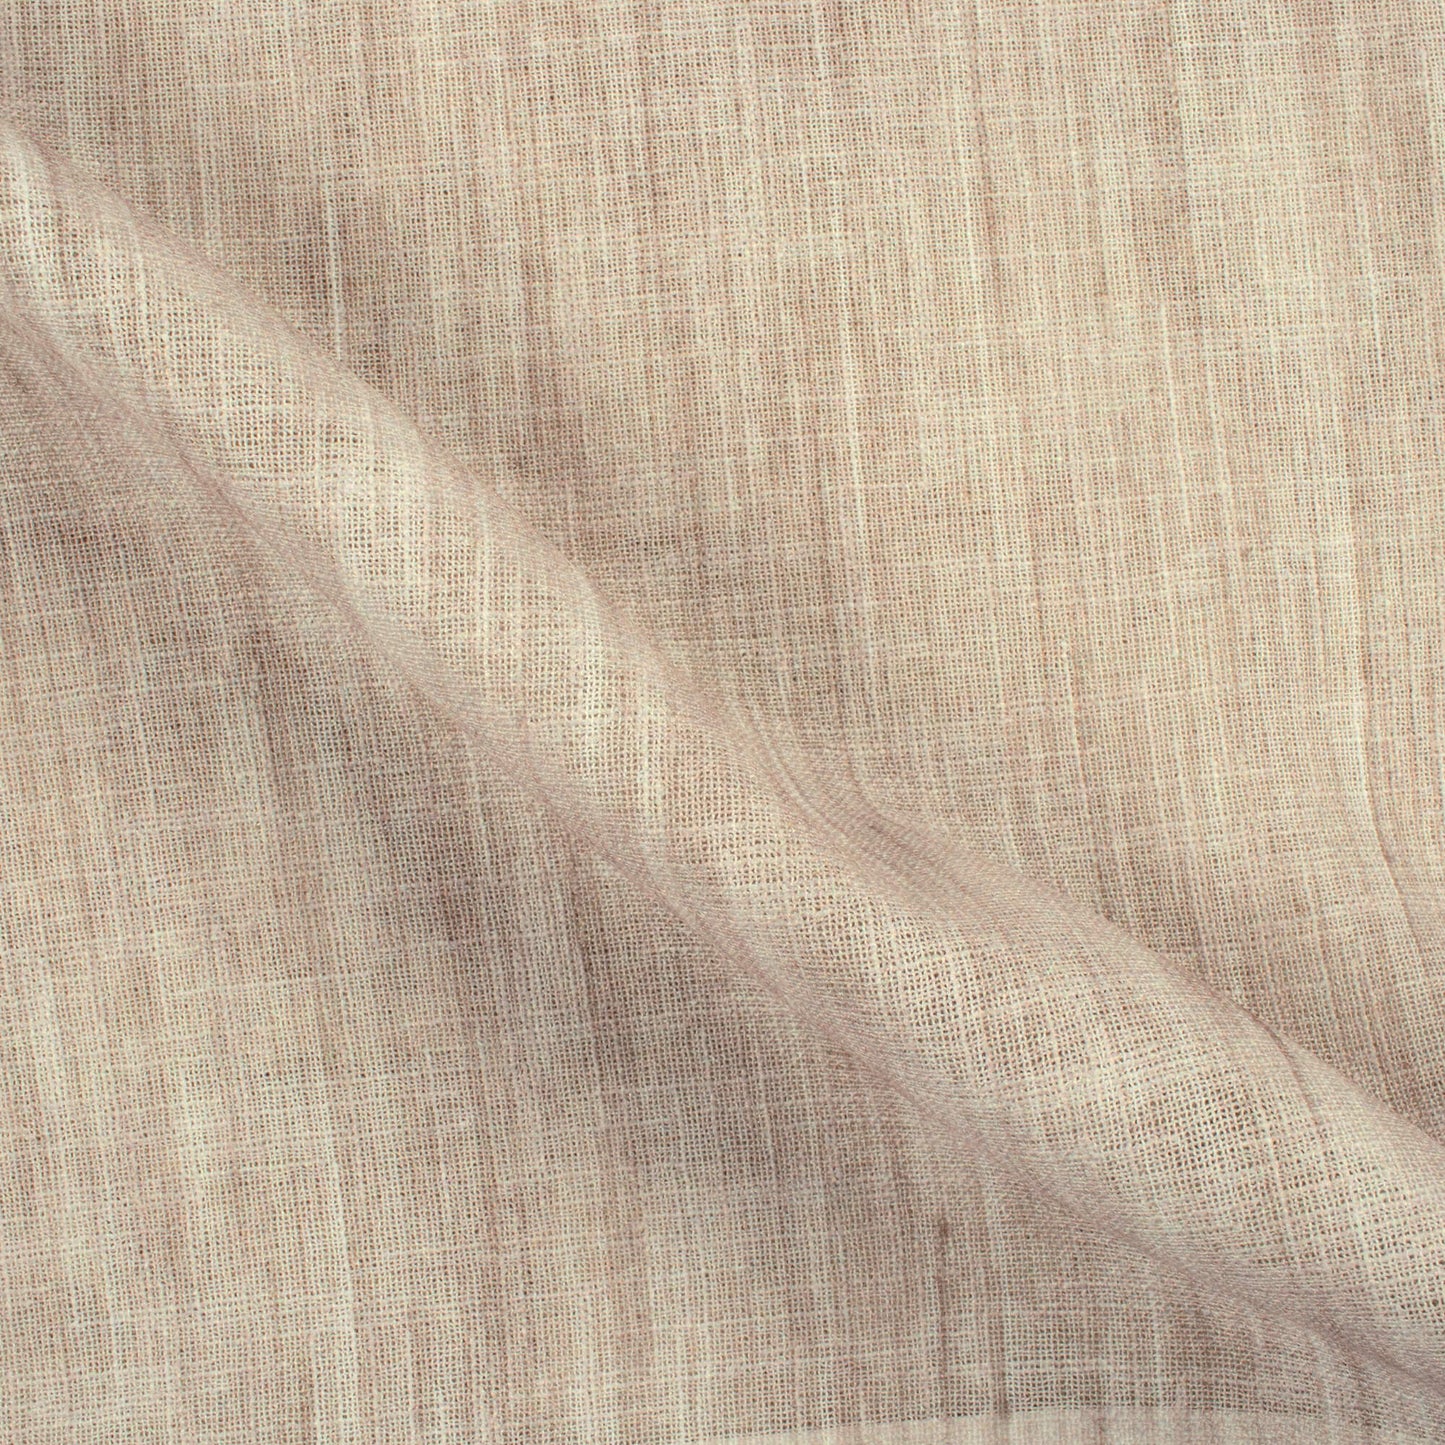 Wheat Brown Textured Premium Sheer Fabric (Width 54 Inches)